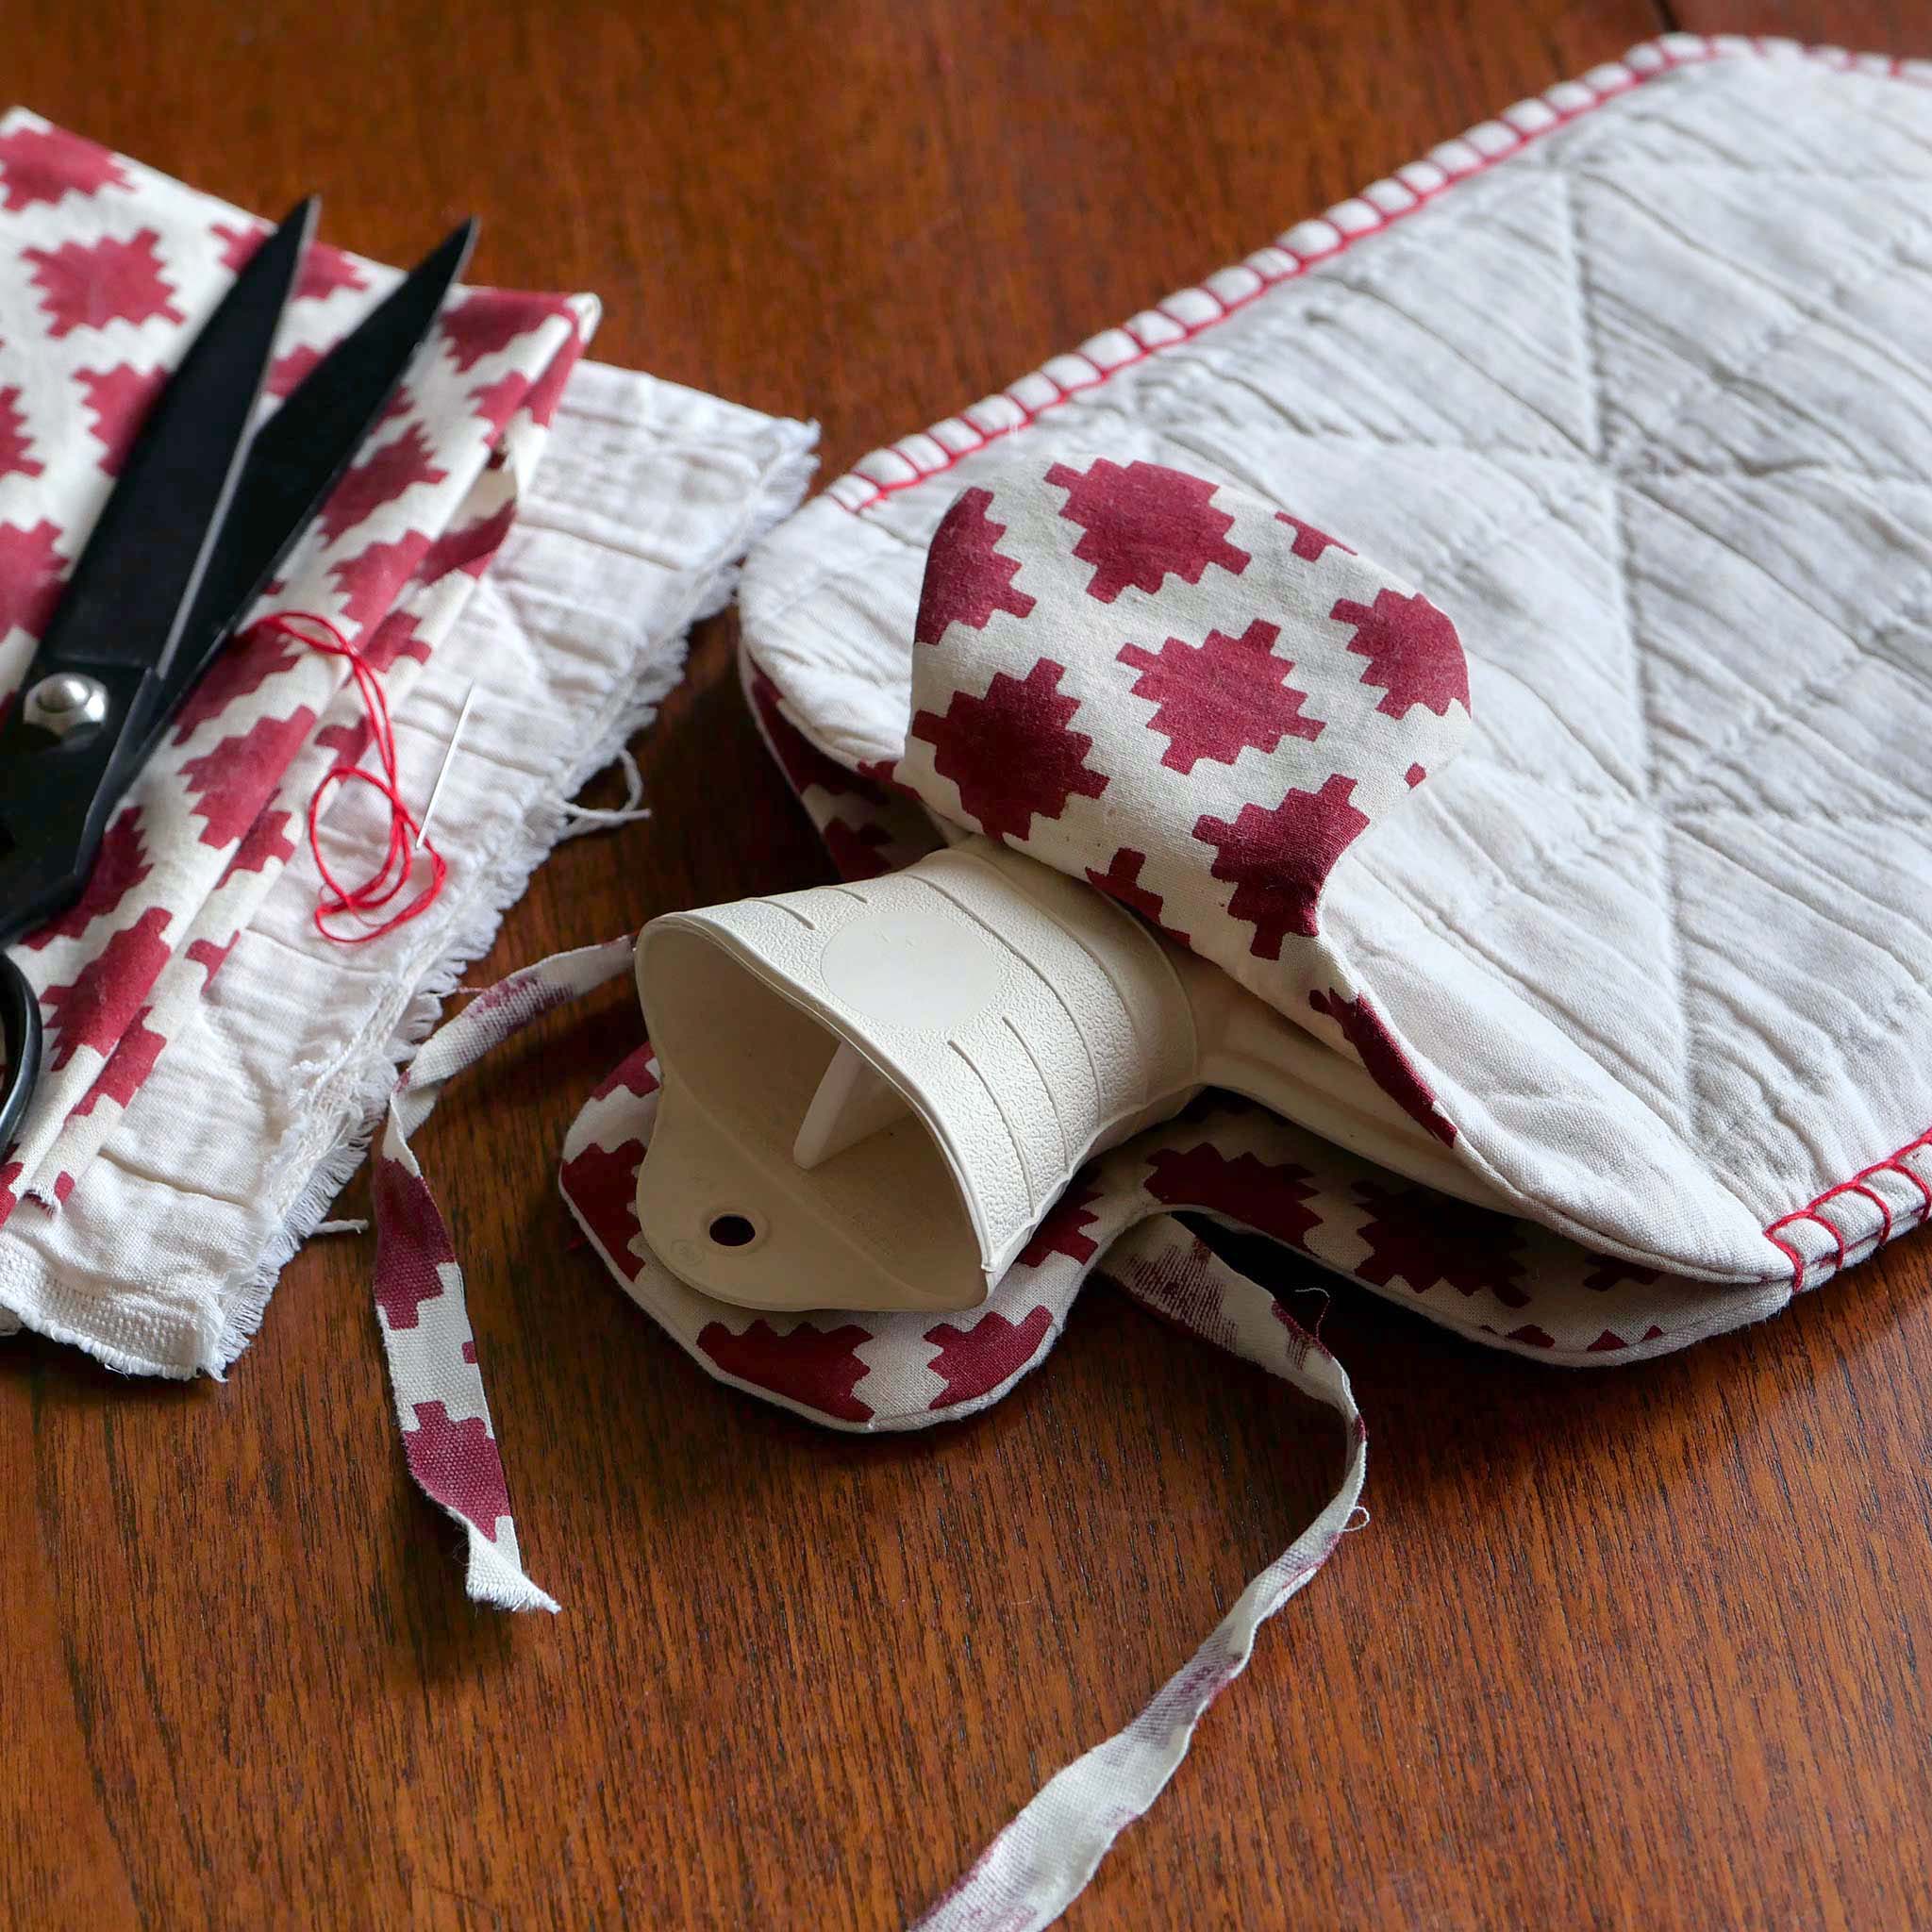 Sewing Tips: making Cover Buttons, without a kit.